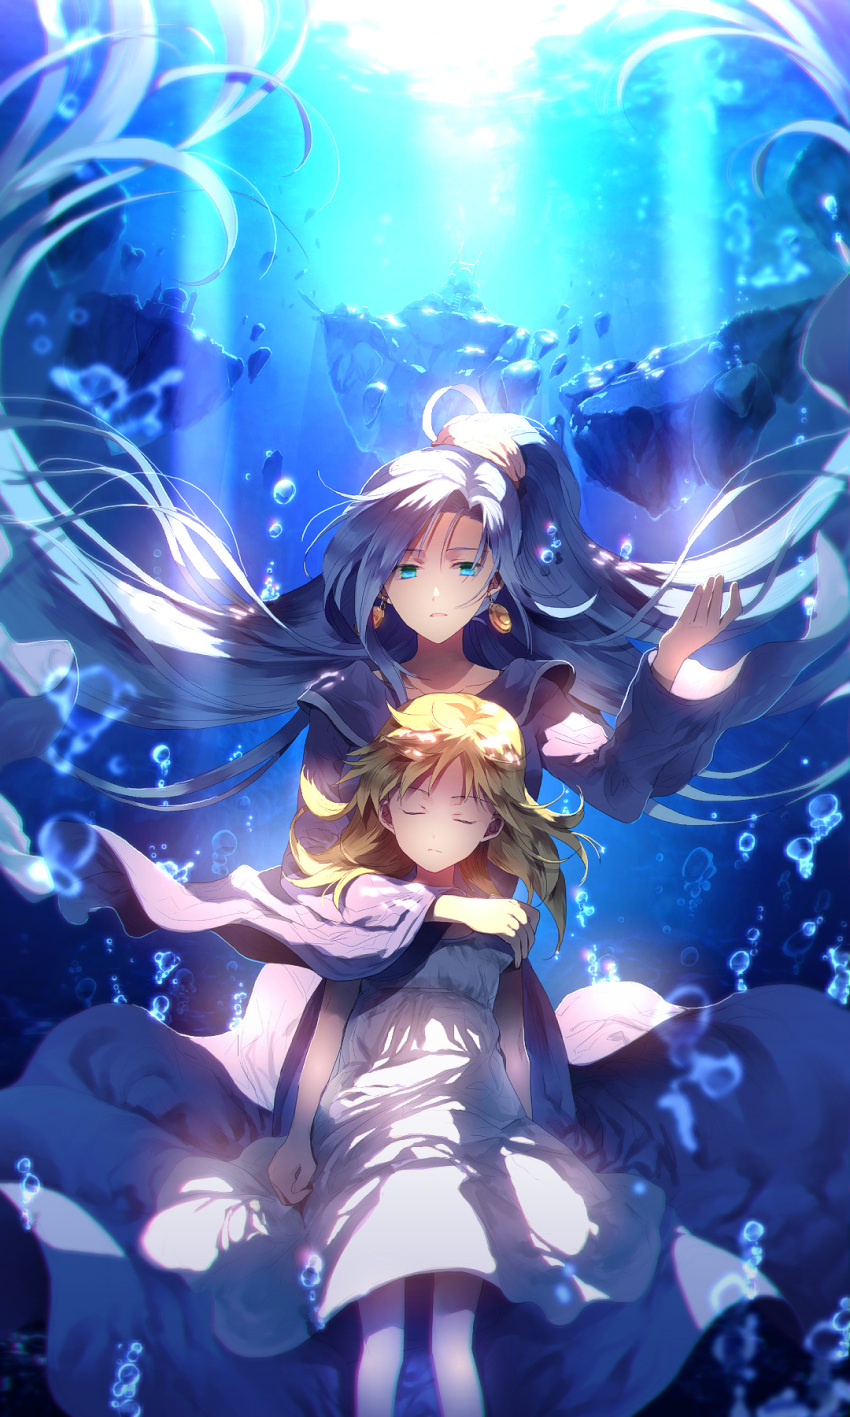 2girls air_bubble arm_around_shoulder blonde_hair blue_eyes blue_hair chrono_cross chrono_trigger closed_eyes dress earrings hand_on_shoulder highres holding jewelry kid_(chrono_cross) long_hair long_sleeves looking_at_viewer multiple_girls ponytail rock schala_zeal sunakumo unconscious underwater white_dress younger